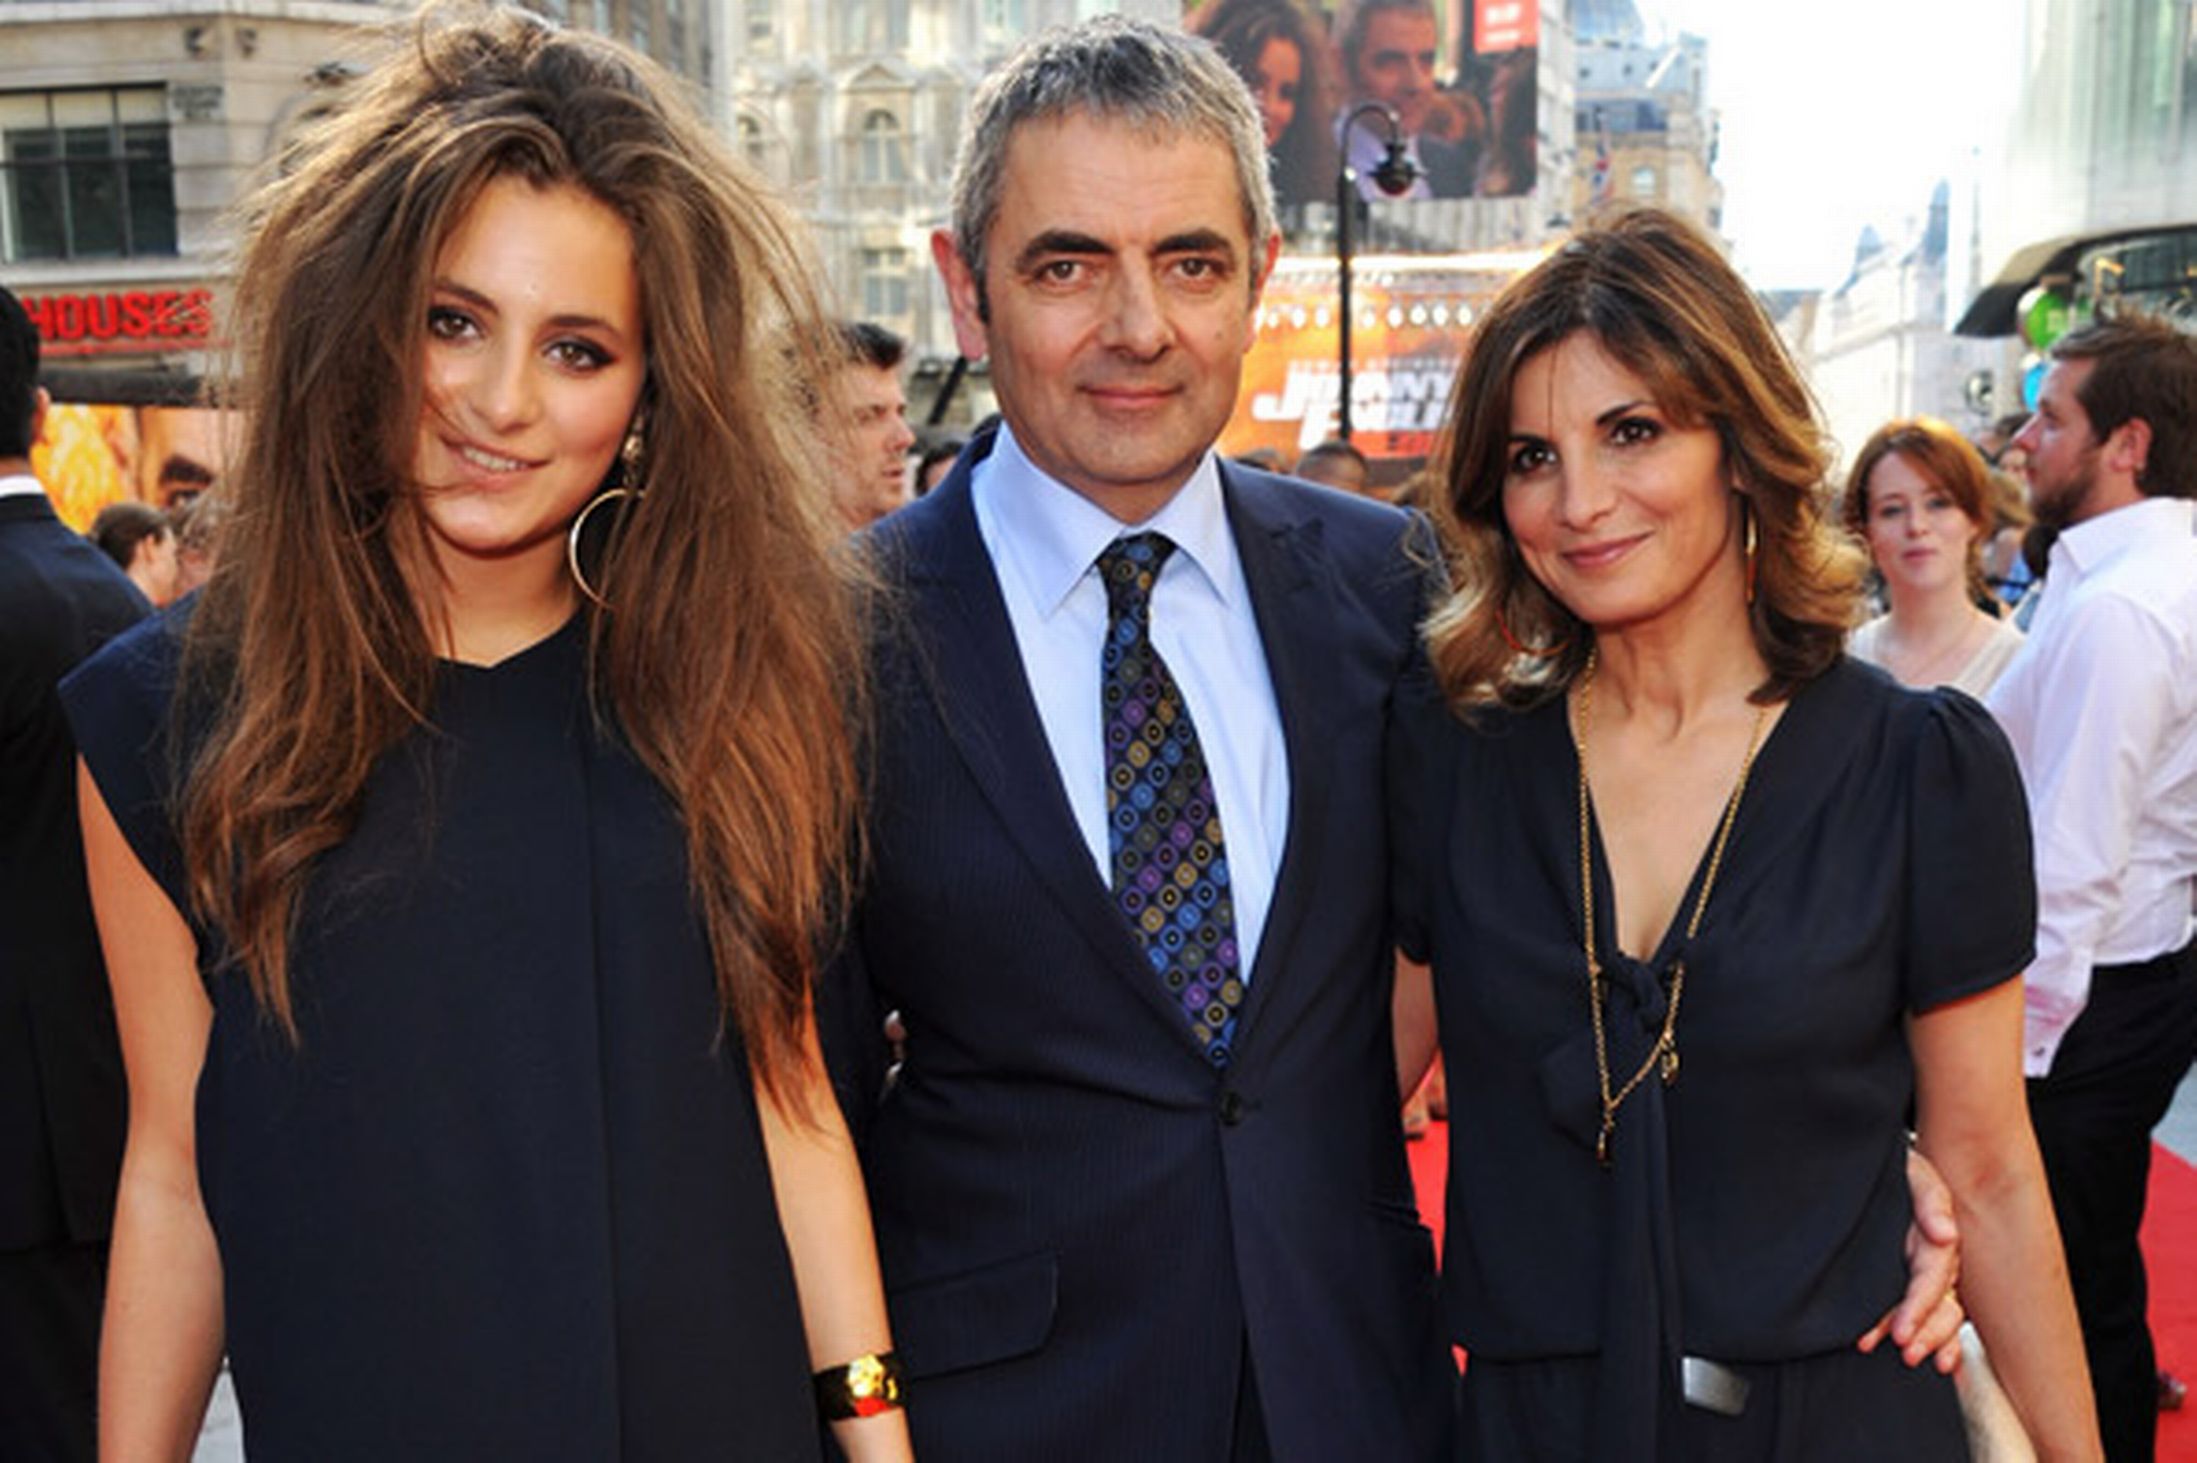 The new MINI. VIPs and fans celebrate a glamorous world premiere in London Rowan-atkinson-attends-johnny-english-rebord-premiere-with-his-daughter-lily-and-wife-sunetra-sastry-pic-wire-259473537-82879